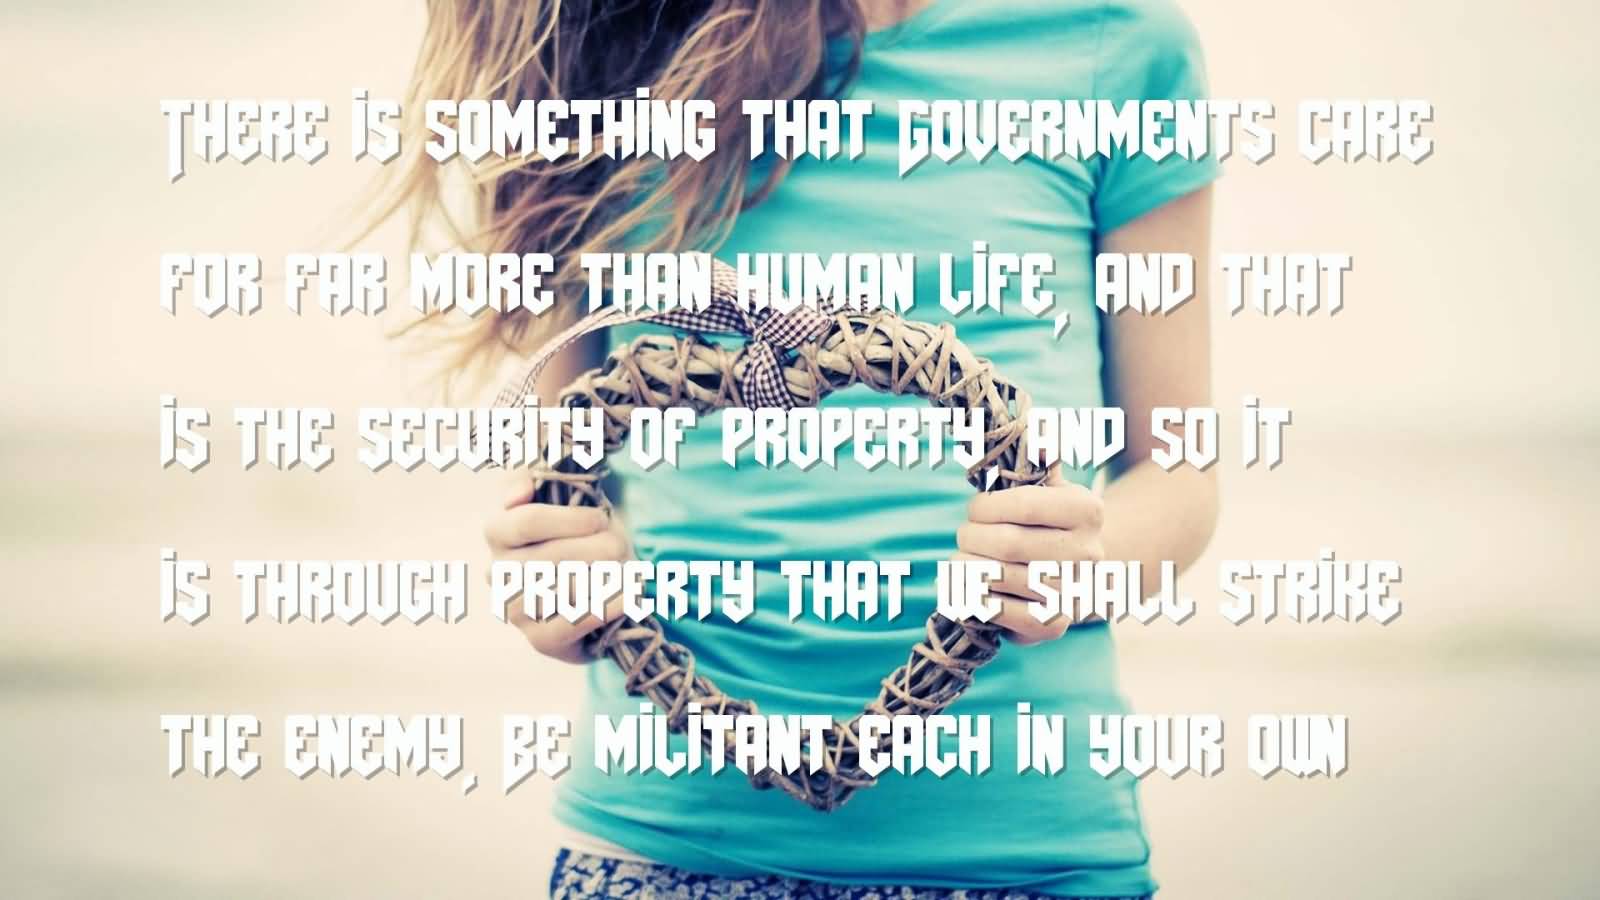 There is something that Governments care for far more than human life, and that is the security of property, and so it is through property that we shall strike the enemy. Be militant each in your own way